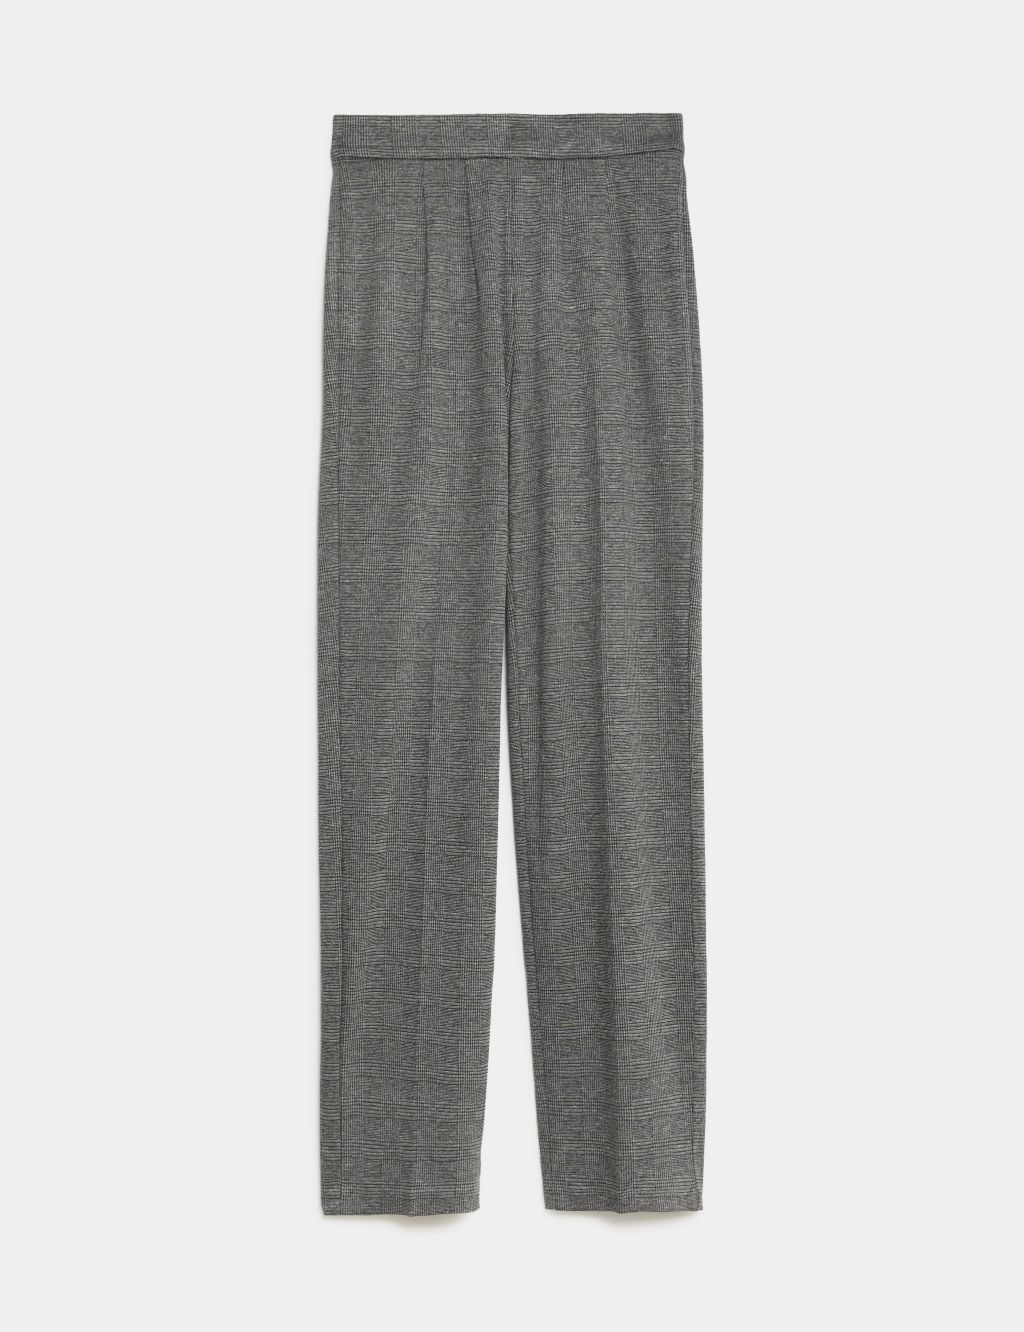 Jersey Checked Straight Leg Trousers image 2